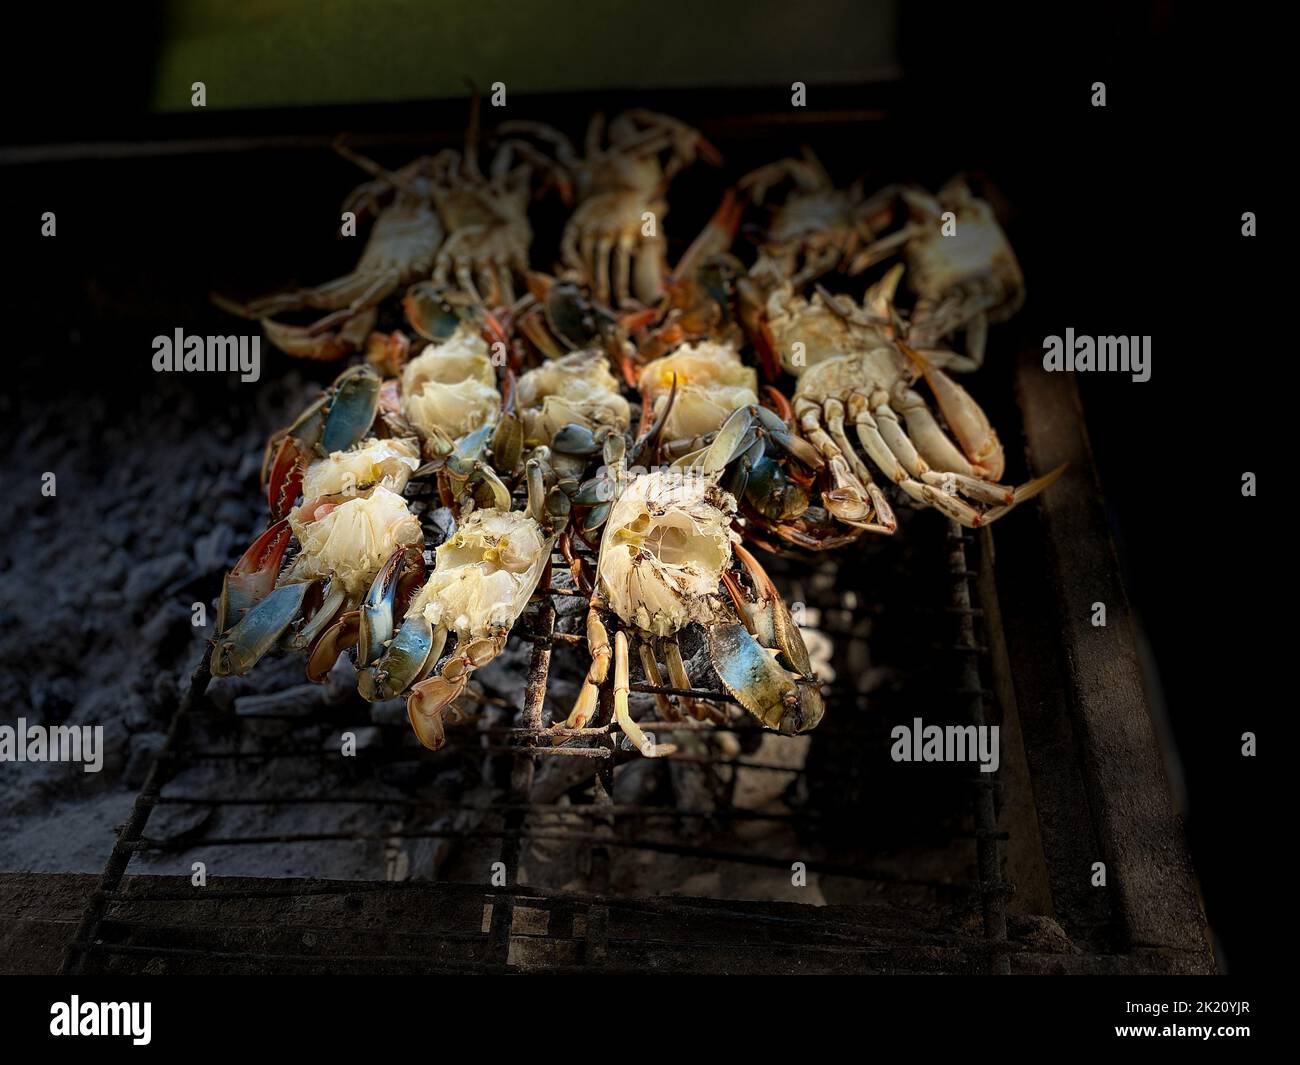 blue crab cooked on the grill. Stock Photo